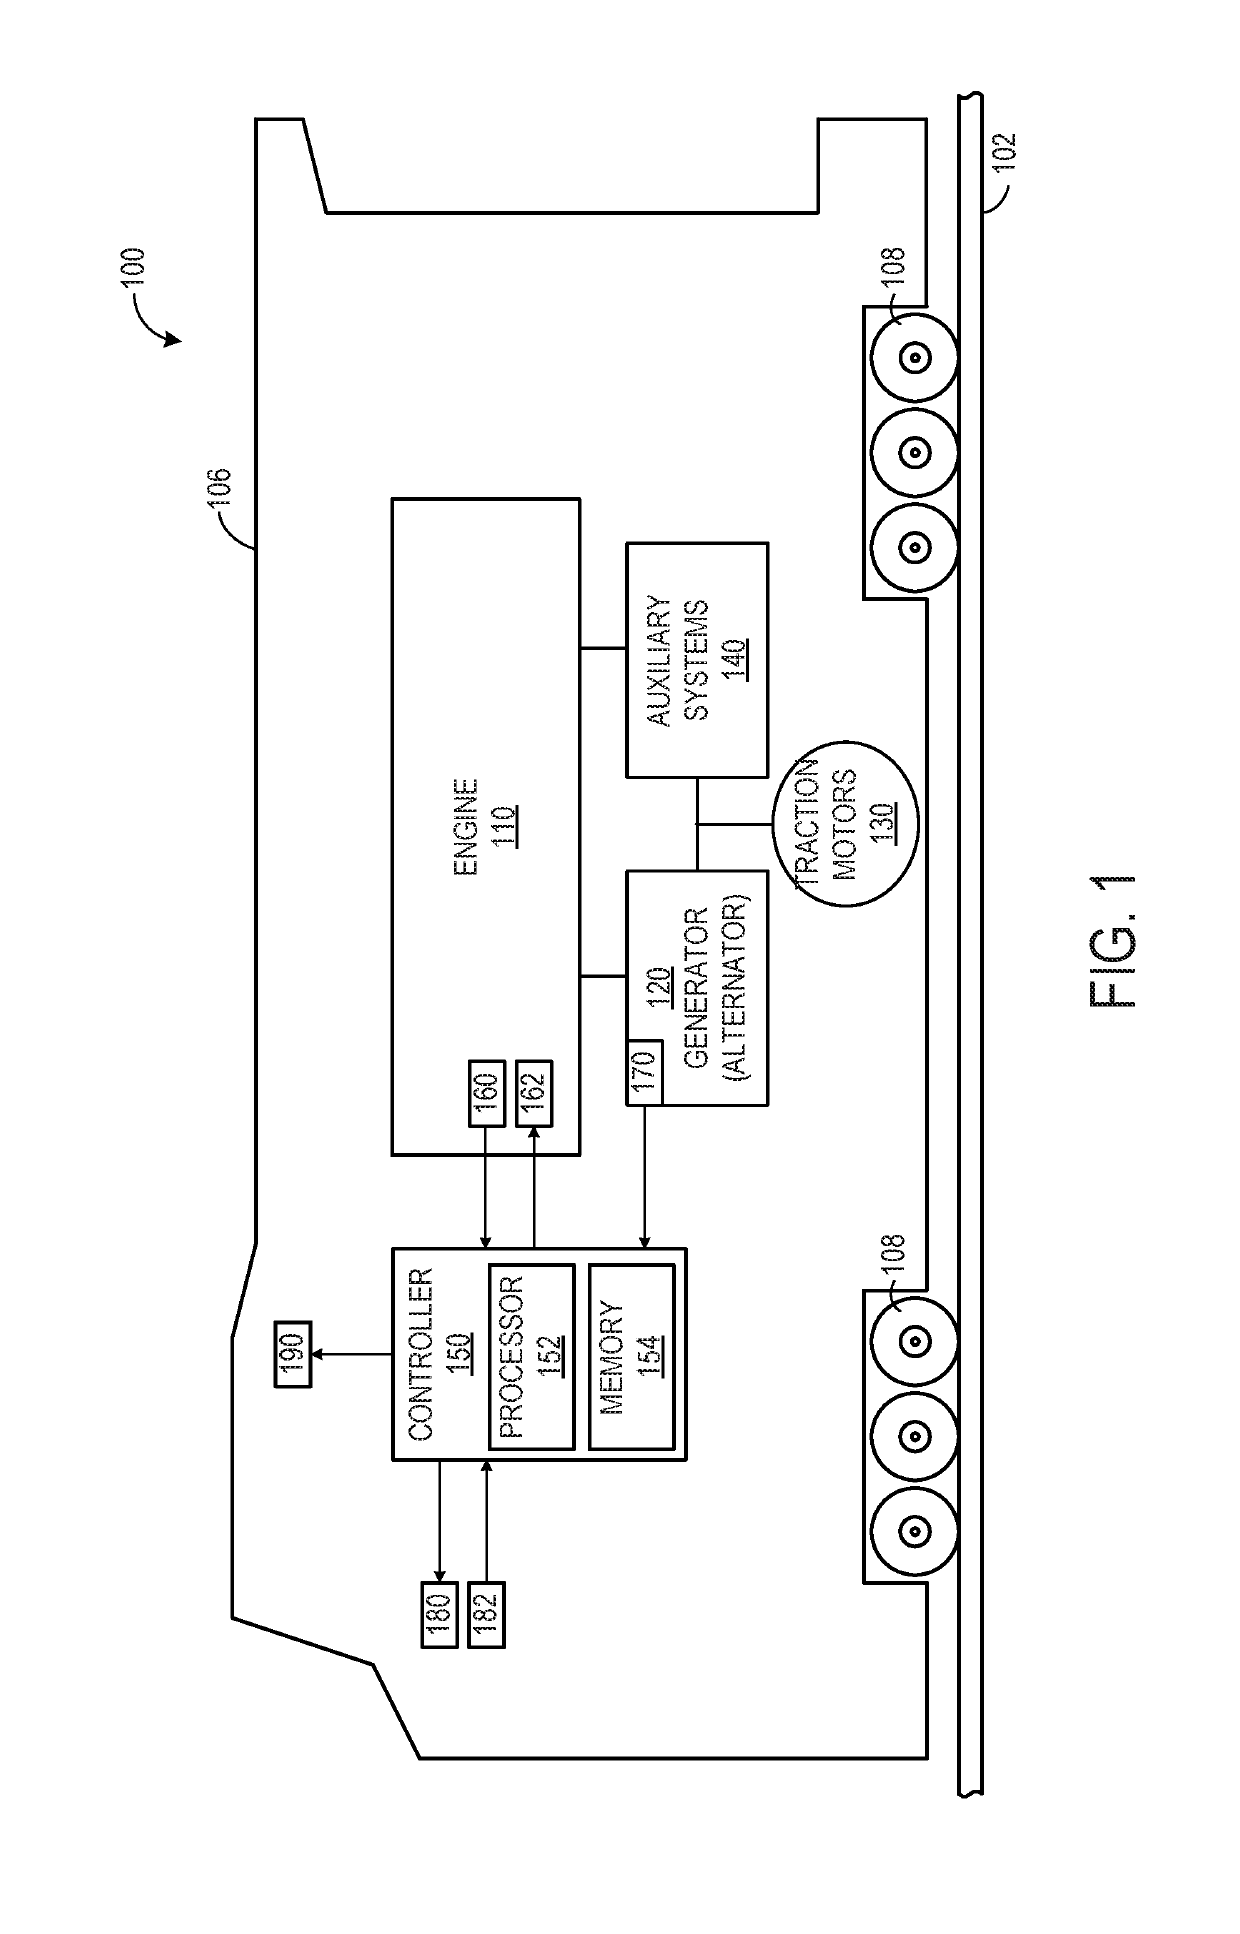 Method and systems for diagnosing an engine